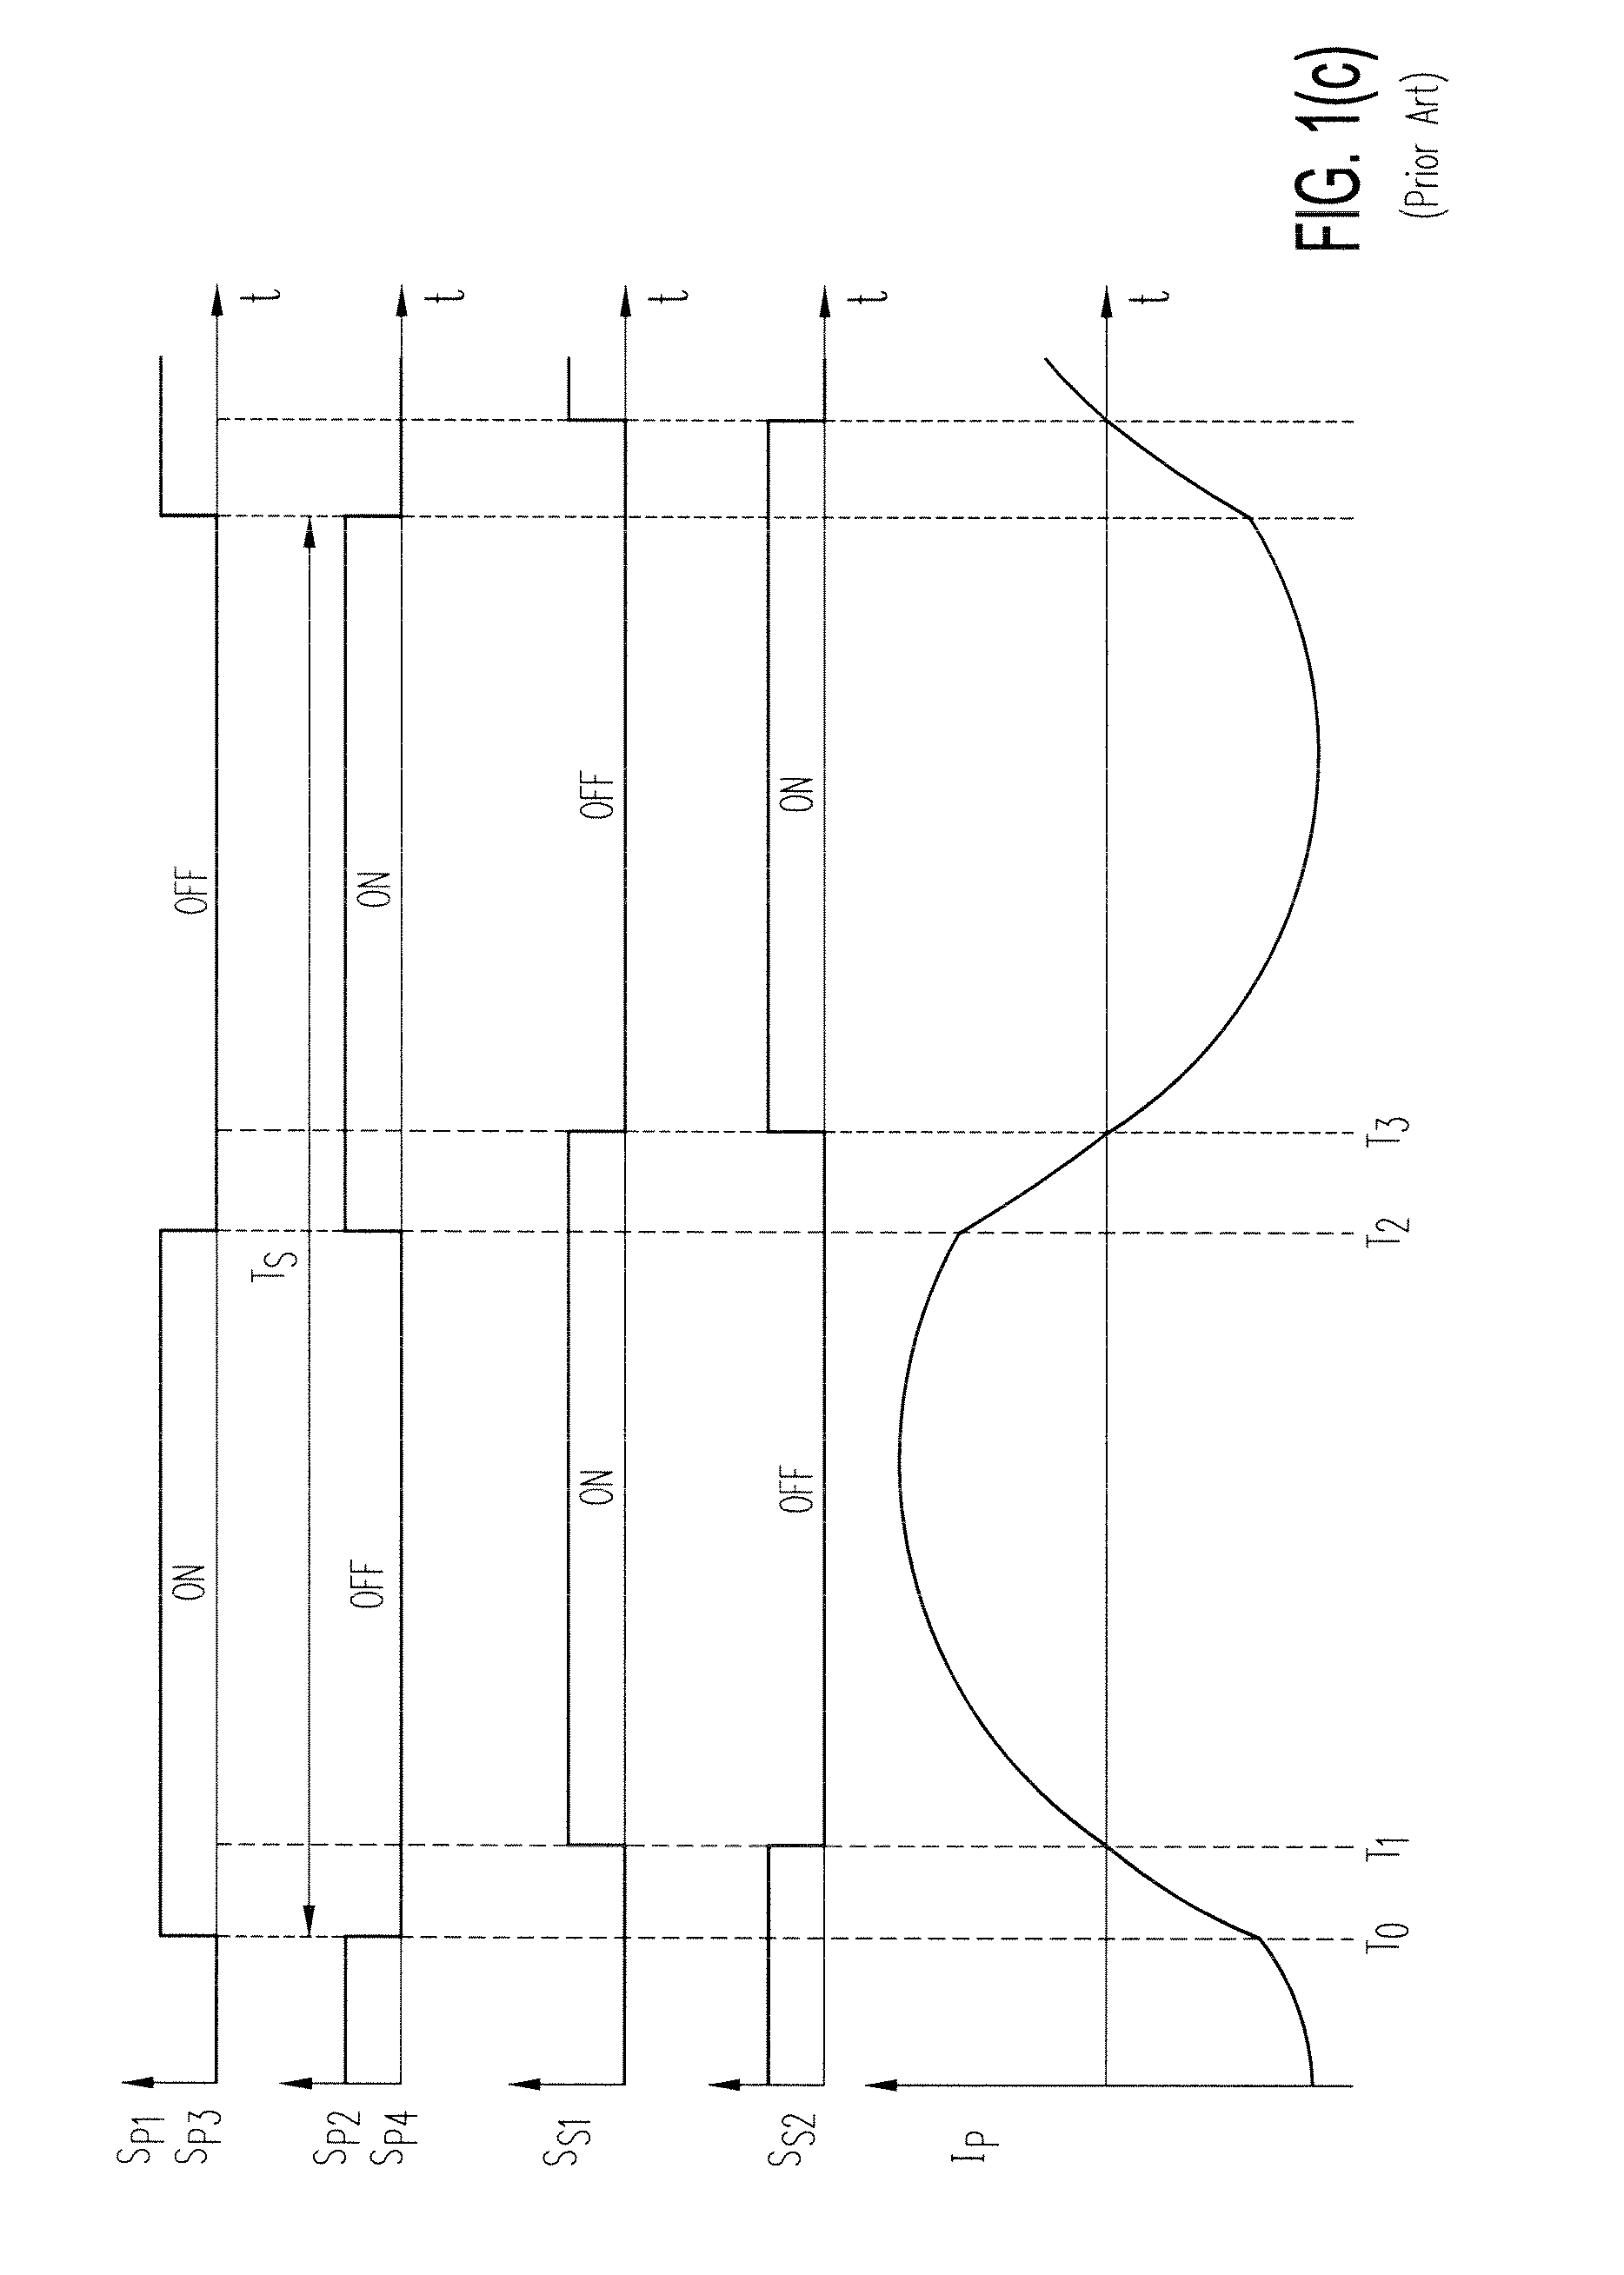 System and methods for controlling secondary side switches in resonant power converters